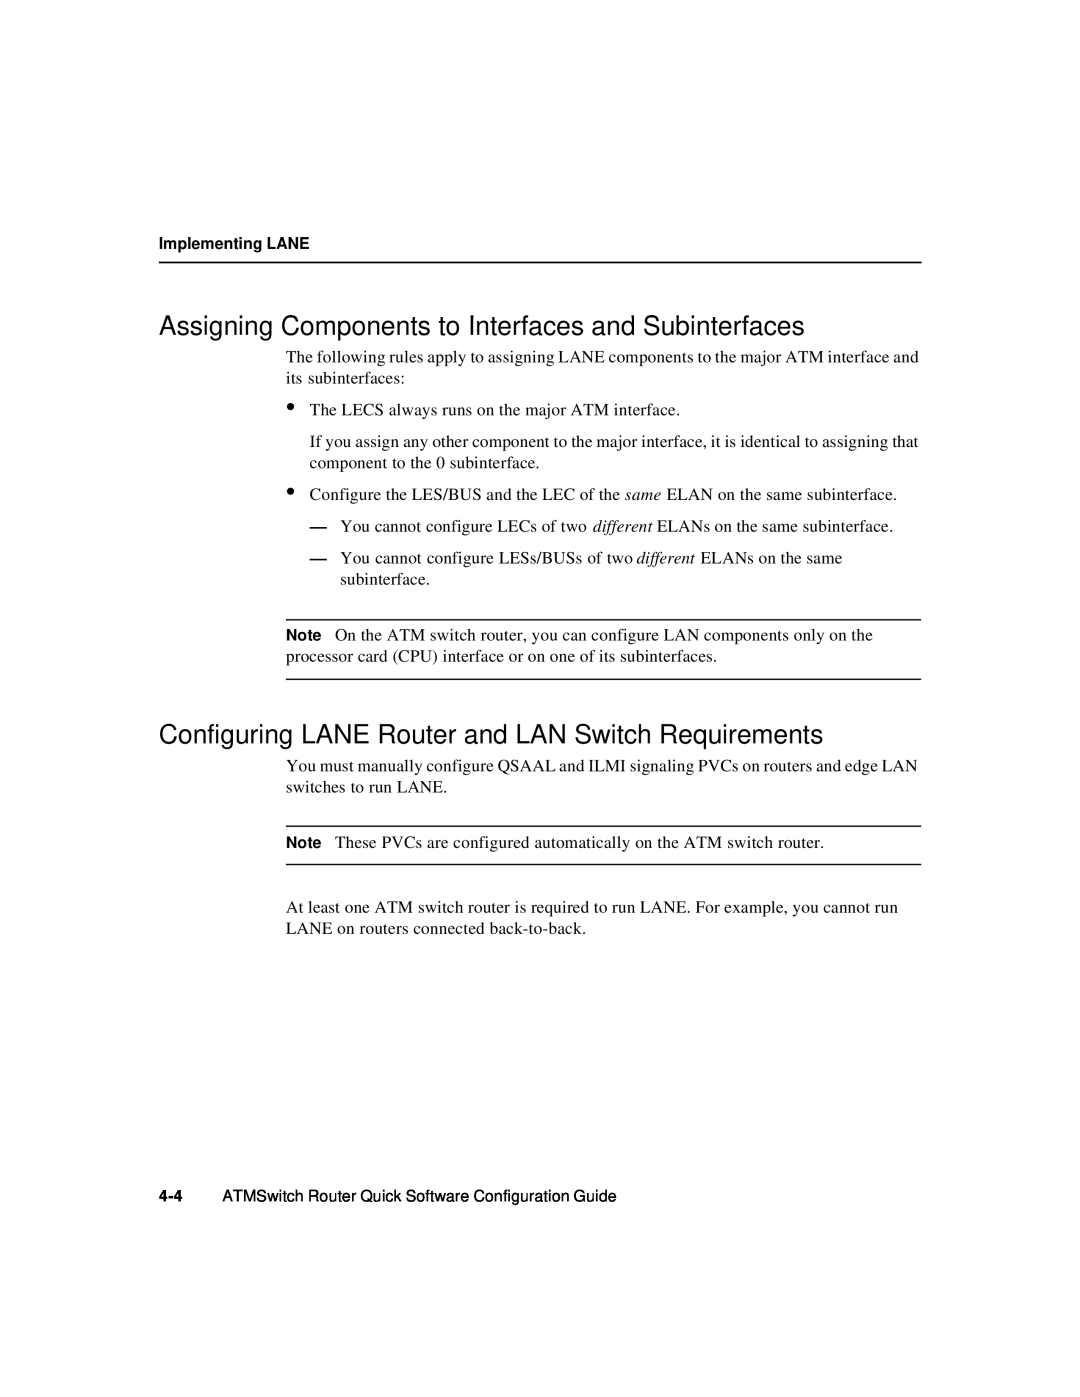 Cisco Systems 78-6897-01 manual Assigning Components to Interfaces and Subinterfaces 